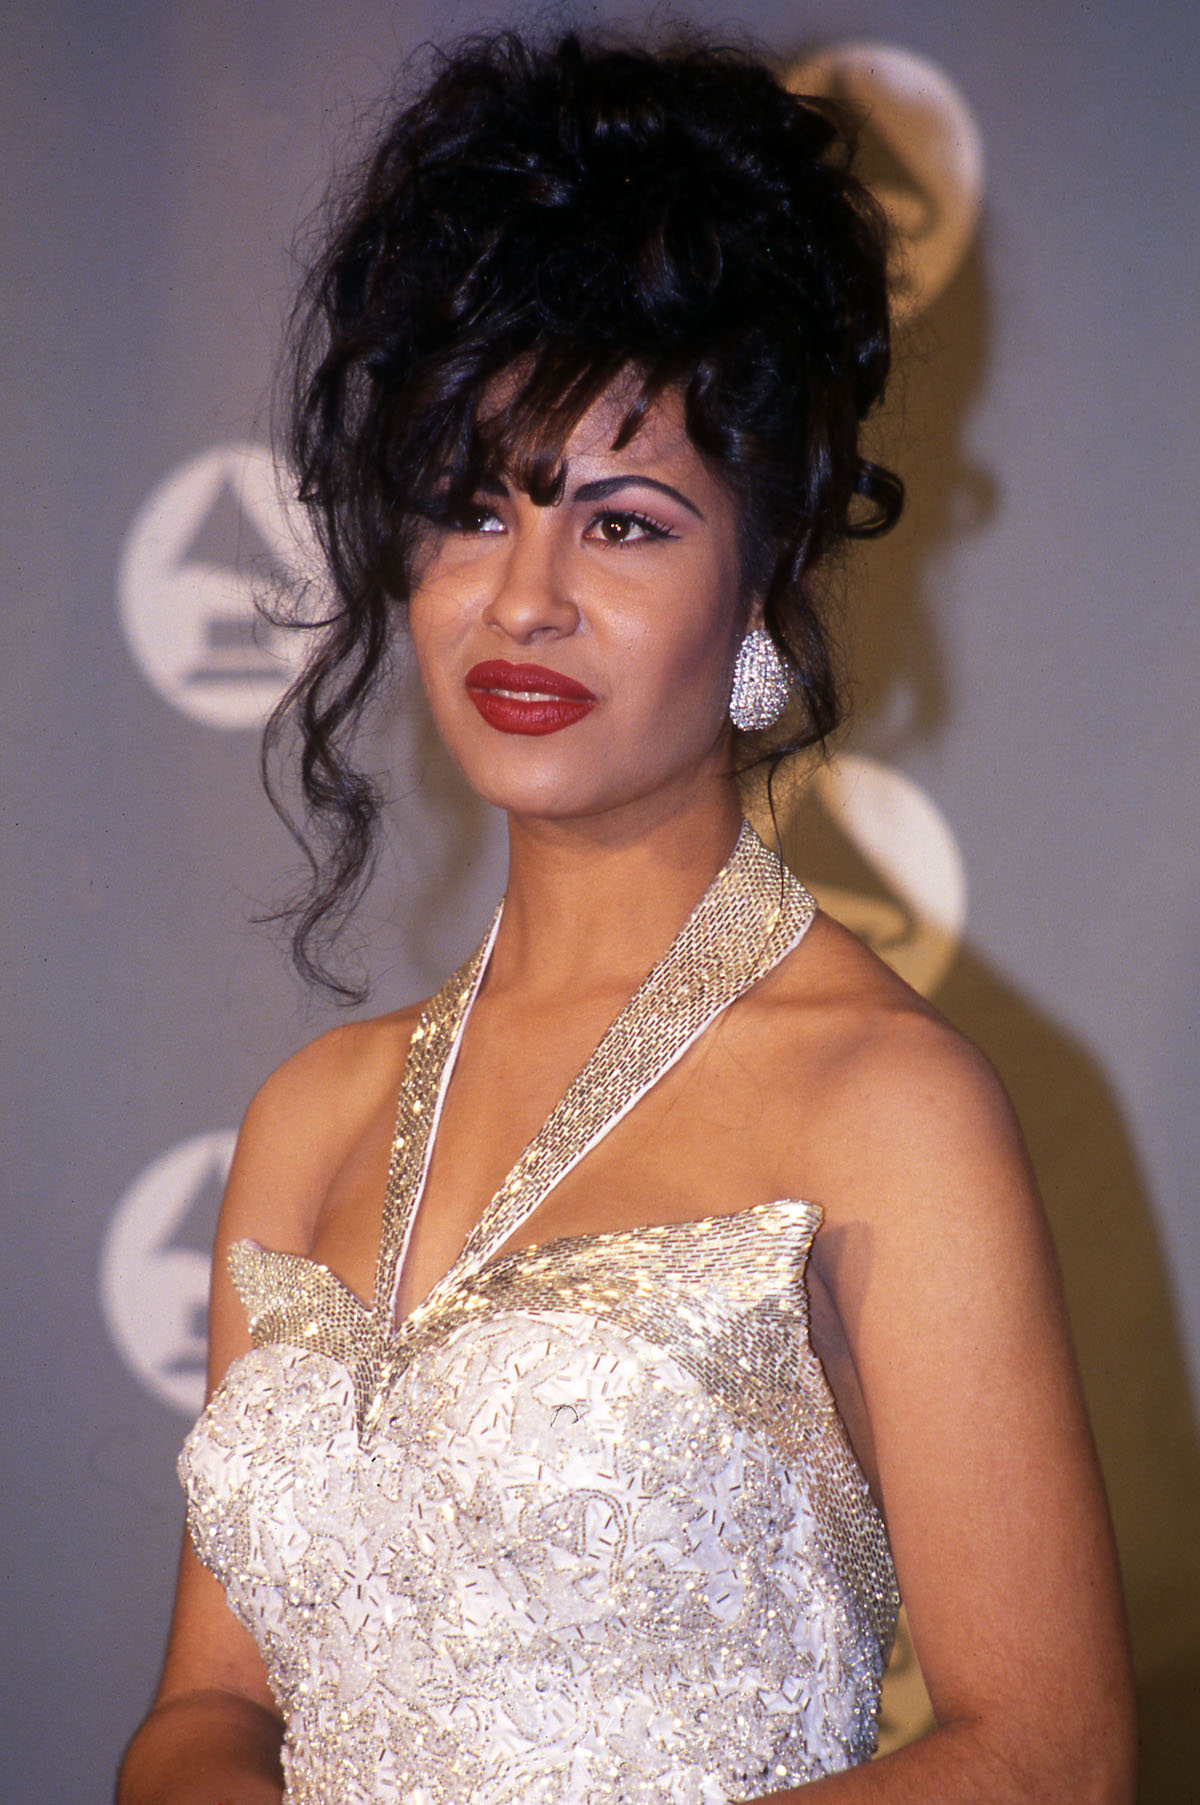 How Selena Quintanilla’s Family Feels About Her Posthumous Grammy